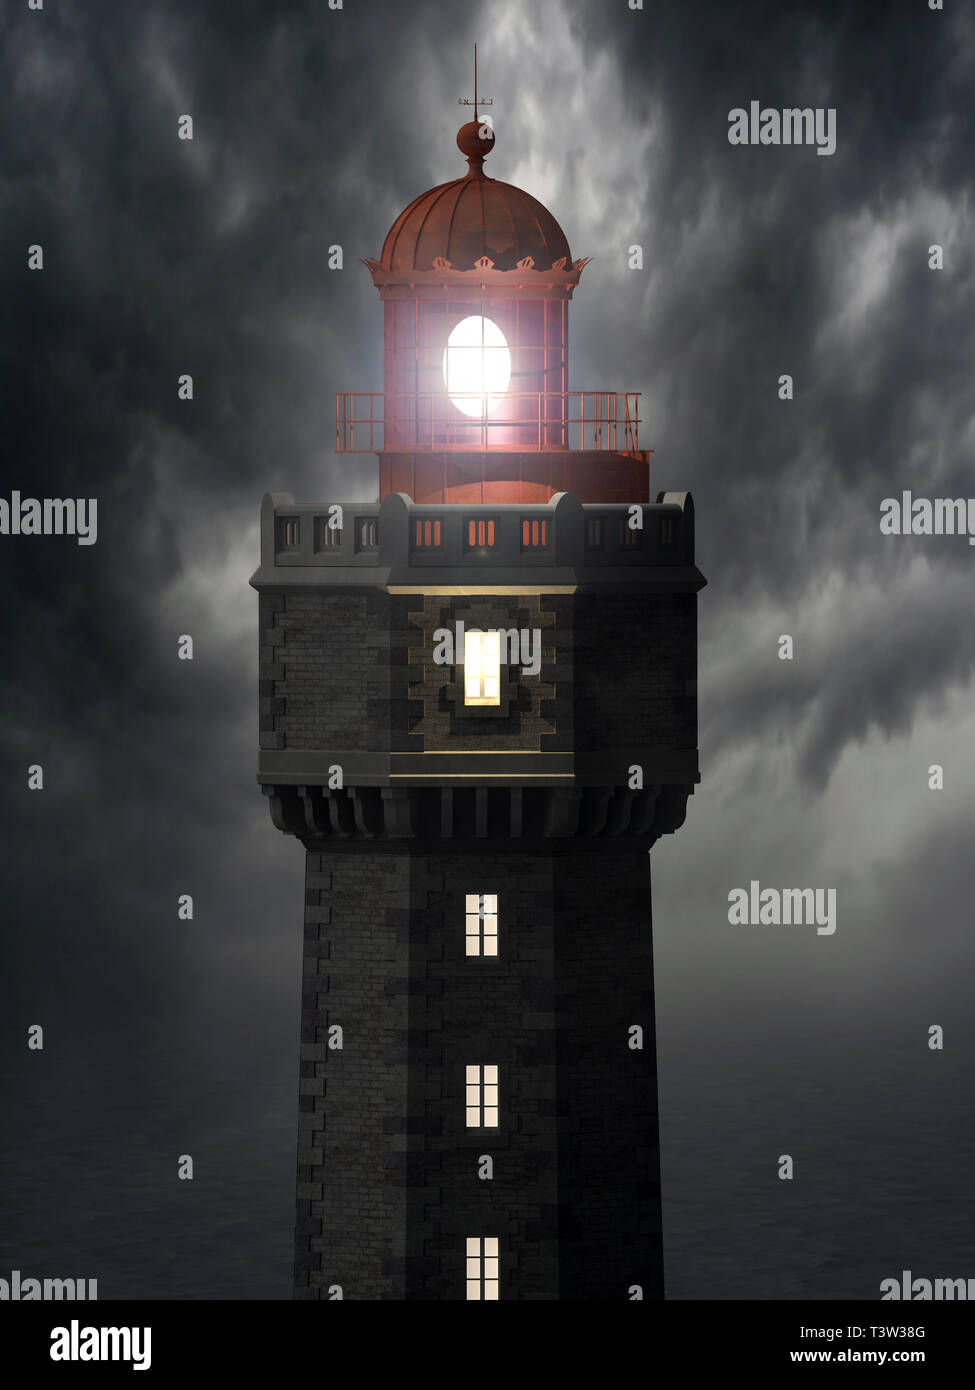 3d illustration of the Jument lighthouse, located on the island of Ouessant in Brittany (France). Stock Photo